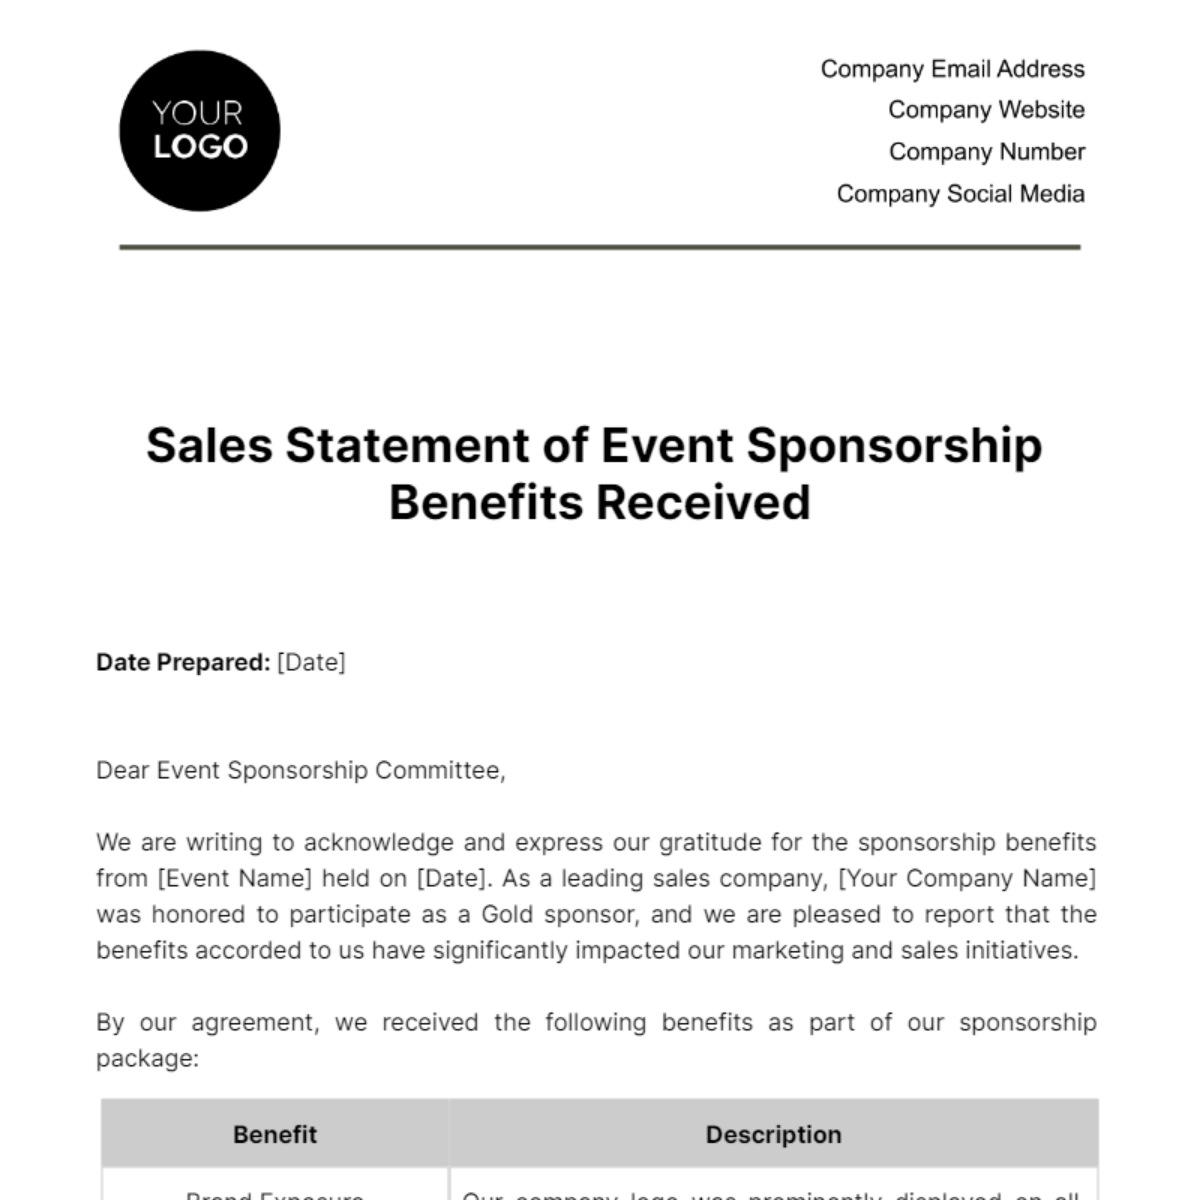 Free Sales Statement of Event Sponsorship Benefits Received Template